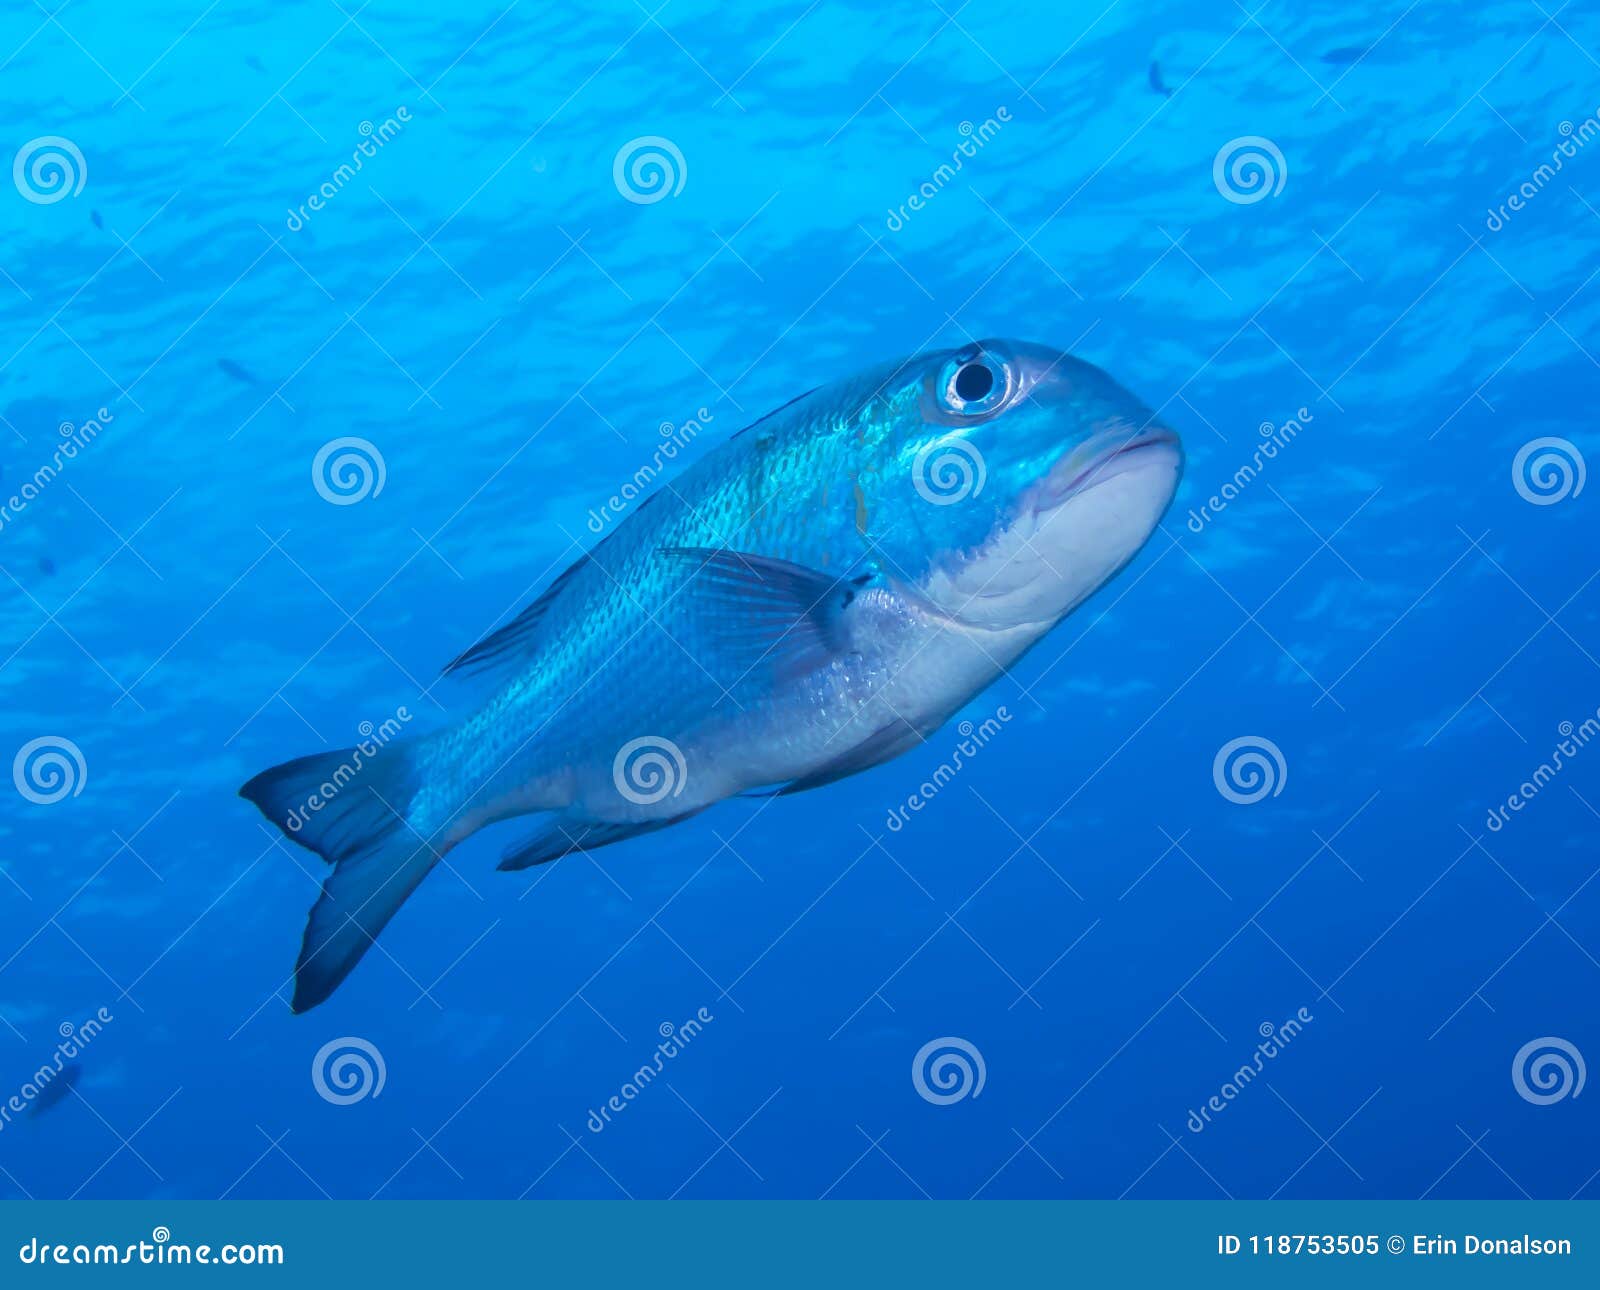 Download Trevally Fish Underwater Close Up Stock Image - Image of ...